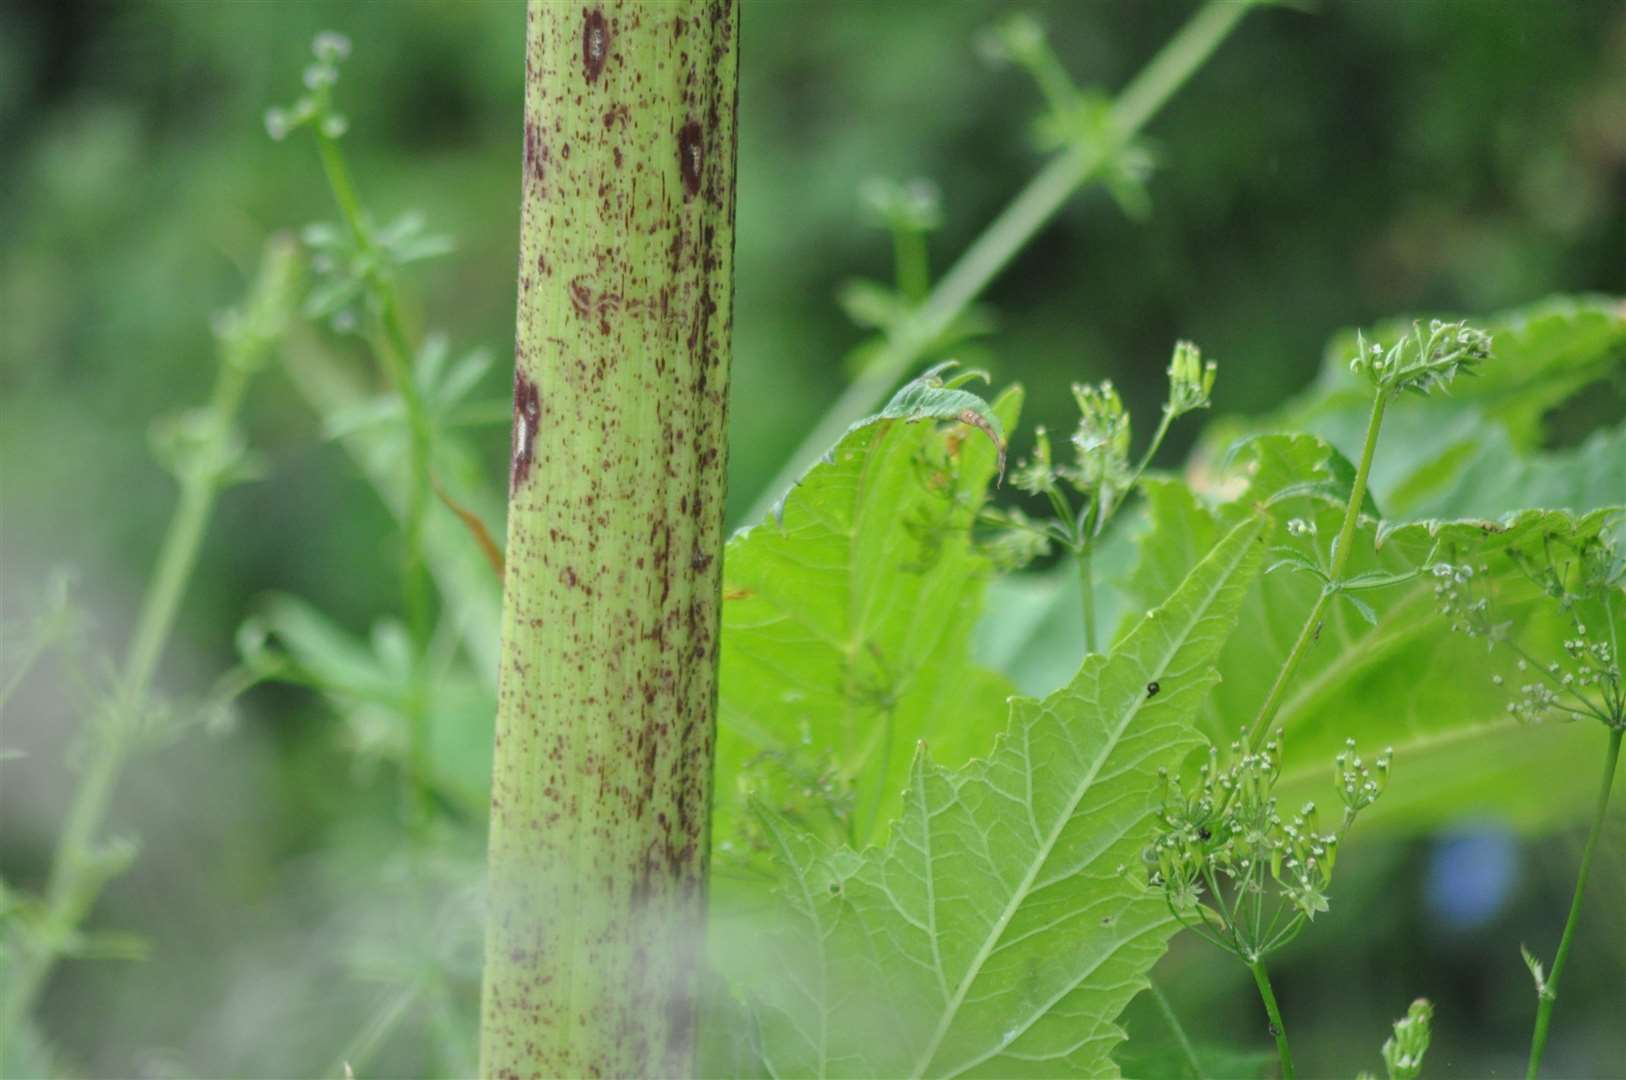 The stem of Giant Hogweed produces a dangerous sap